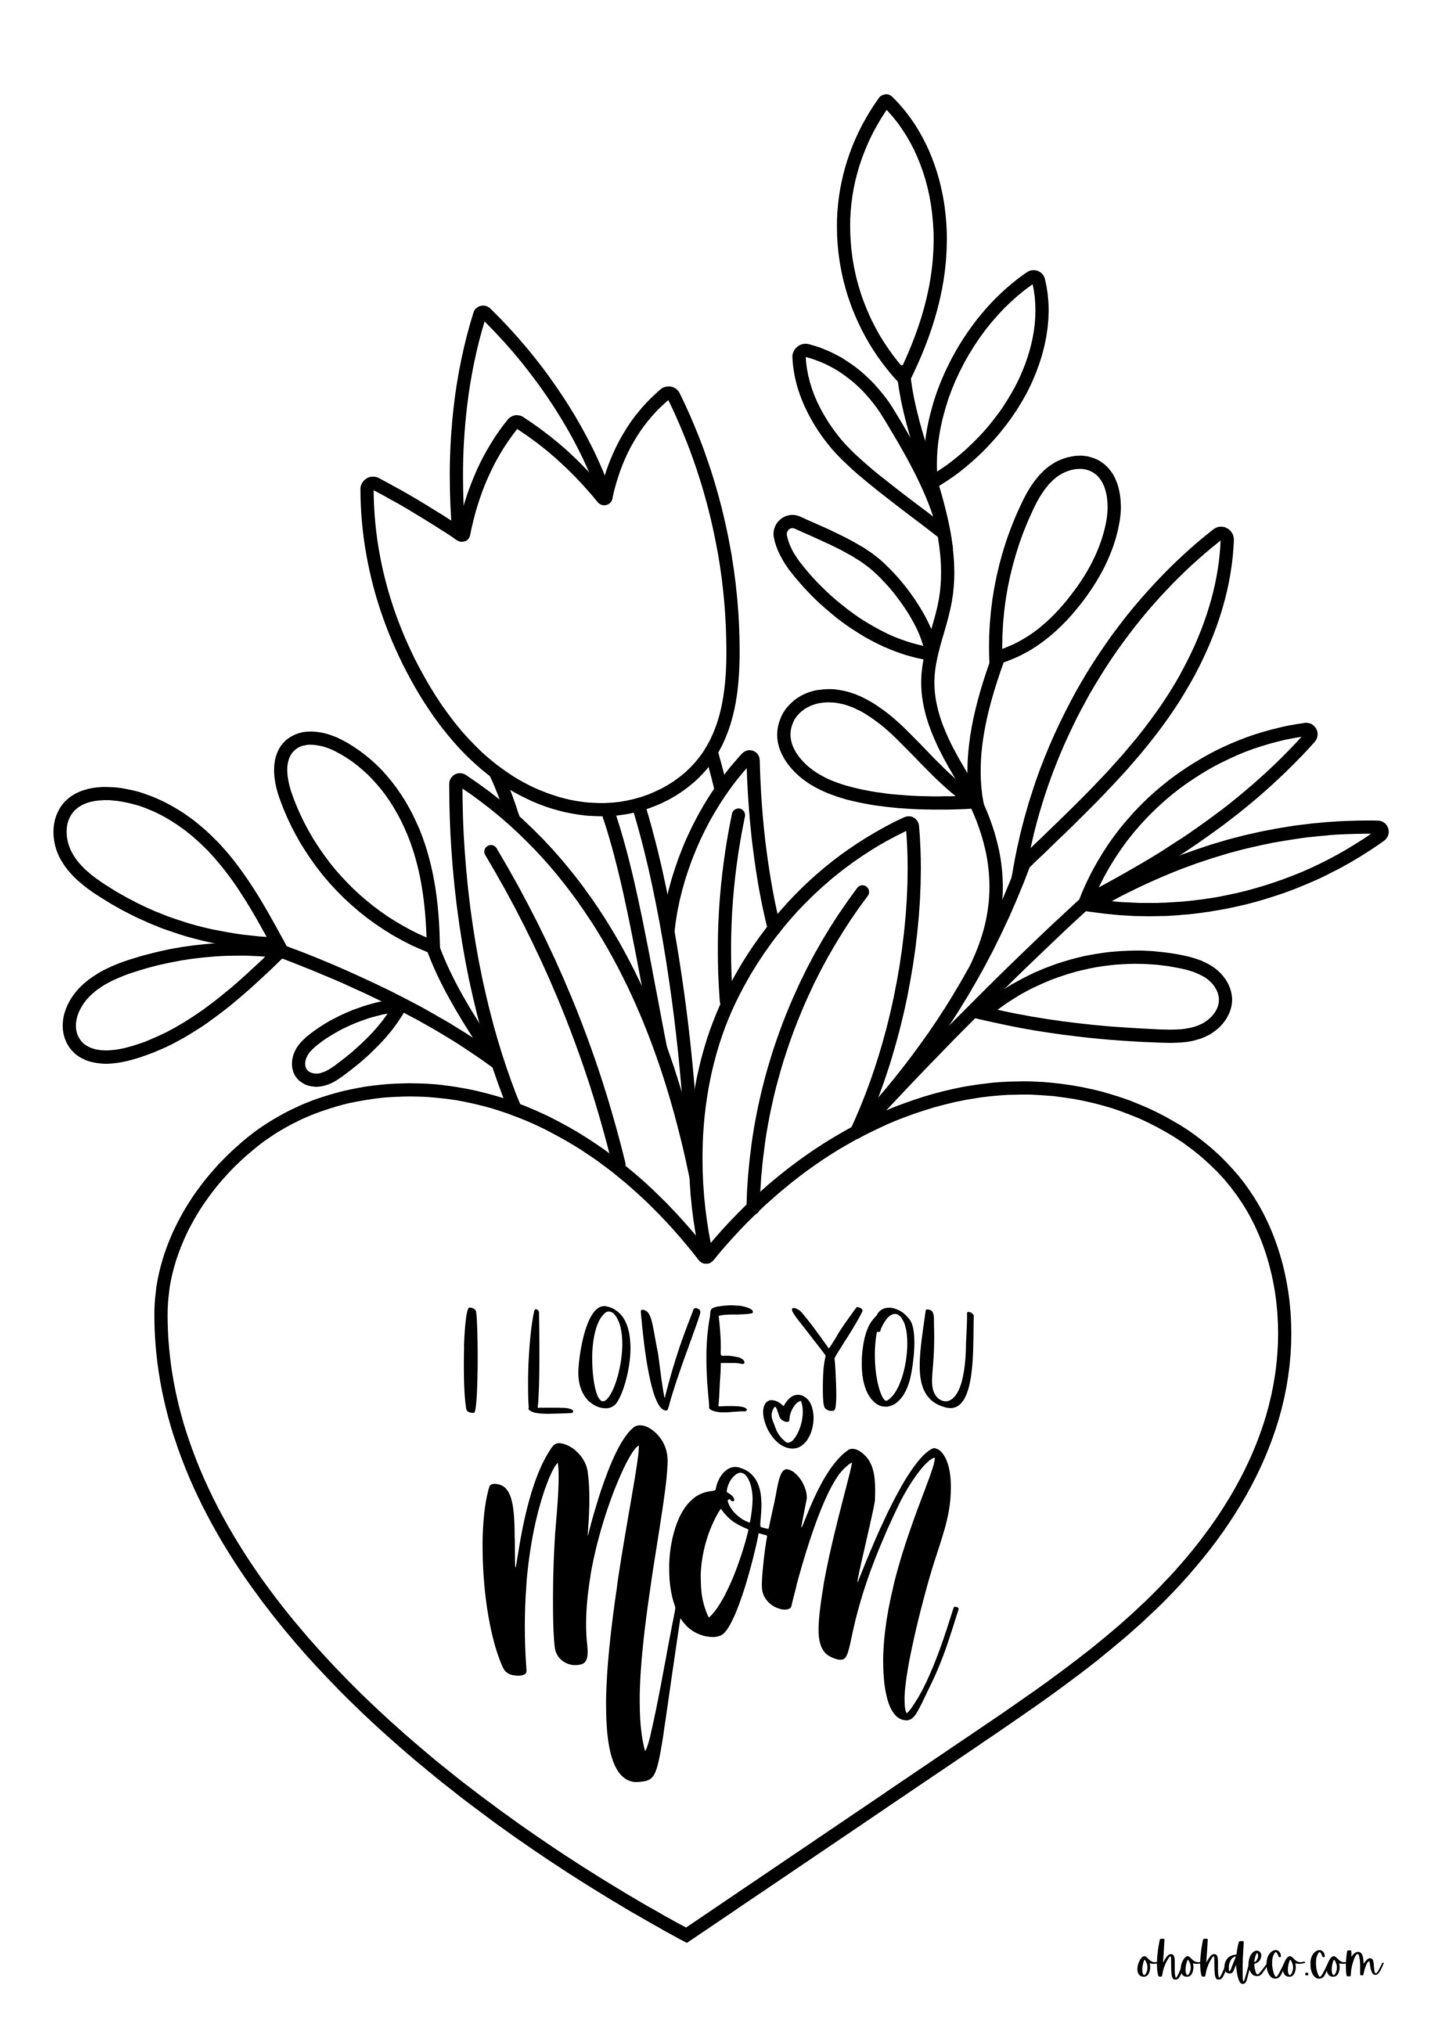 love mom coloring page